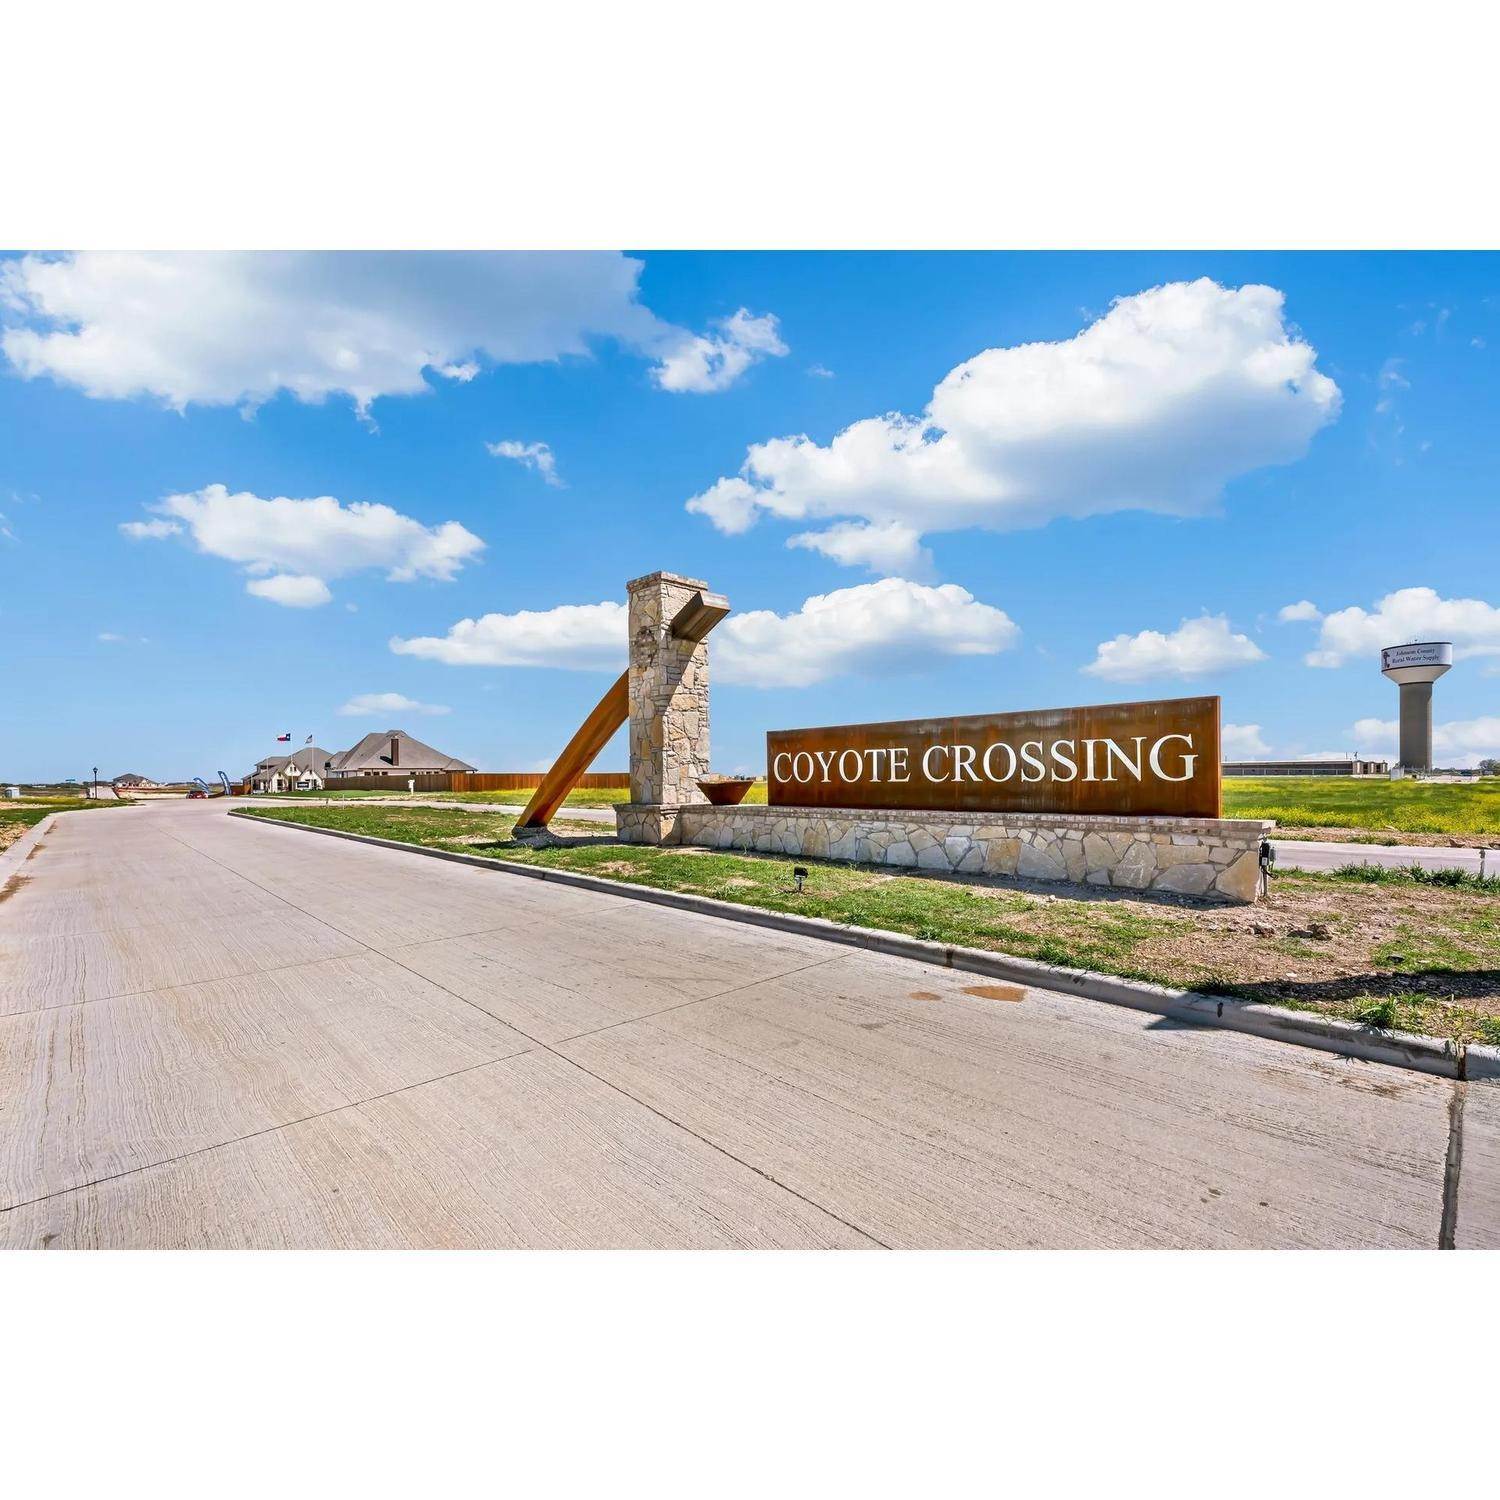 16. Coyote Crossing建於 12529 Yellowstone St, Godley, TX 76044